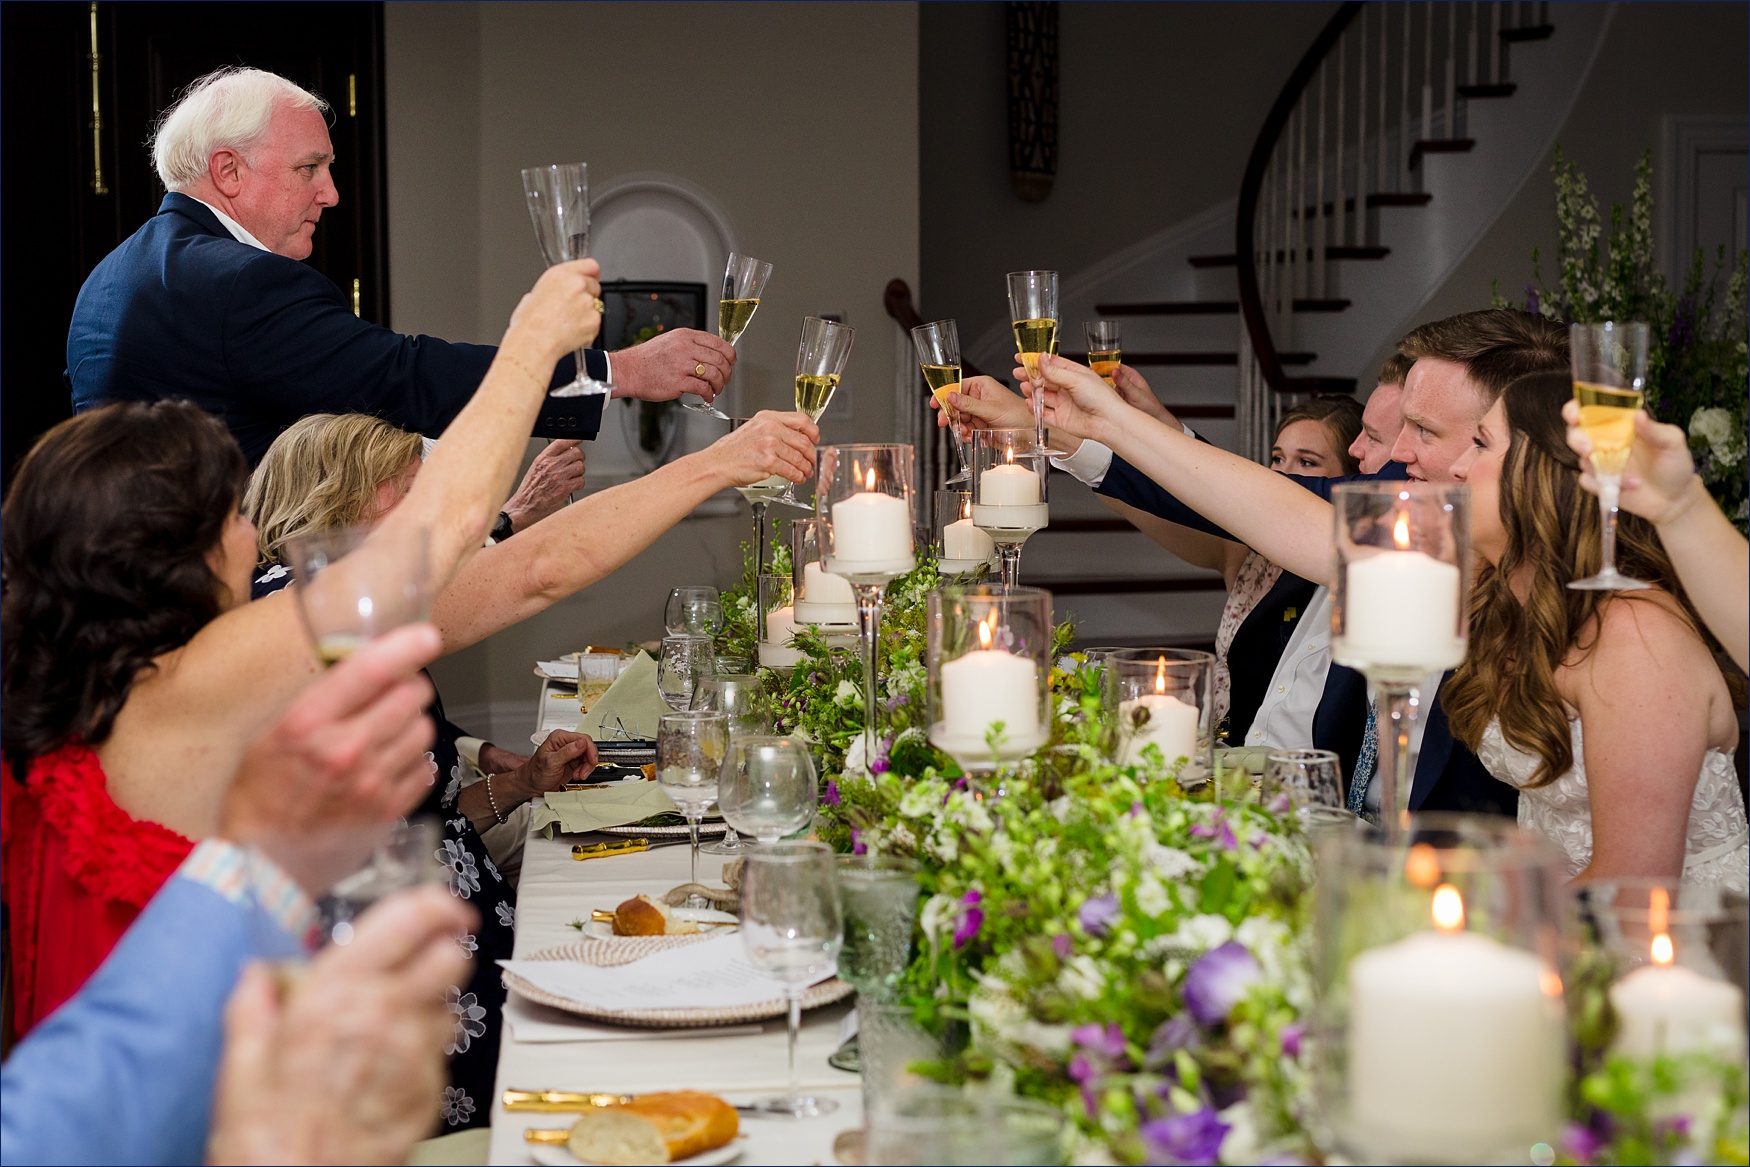 Toasts and laughter at the dinner table